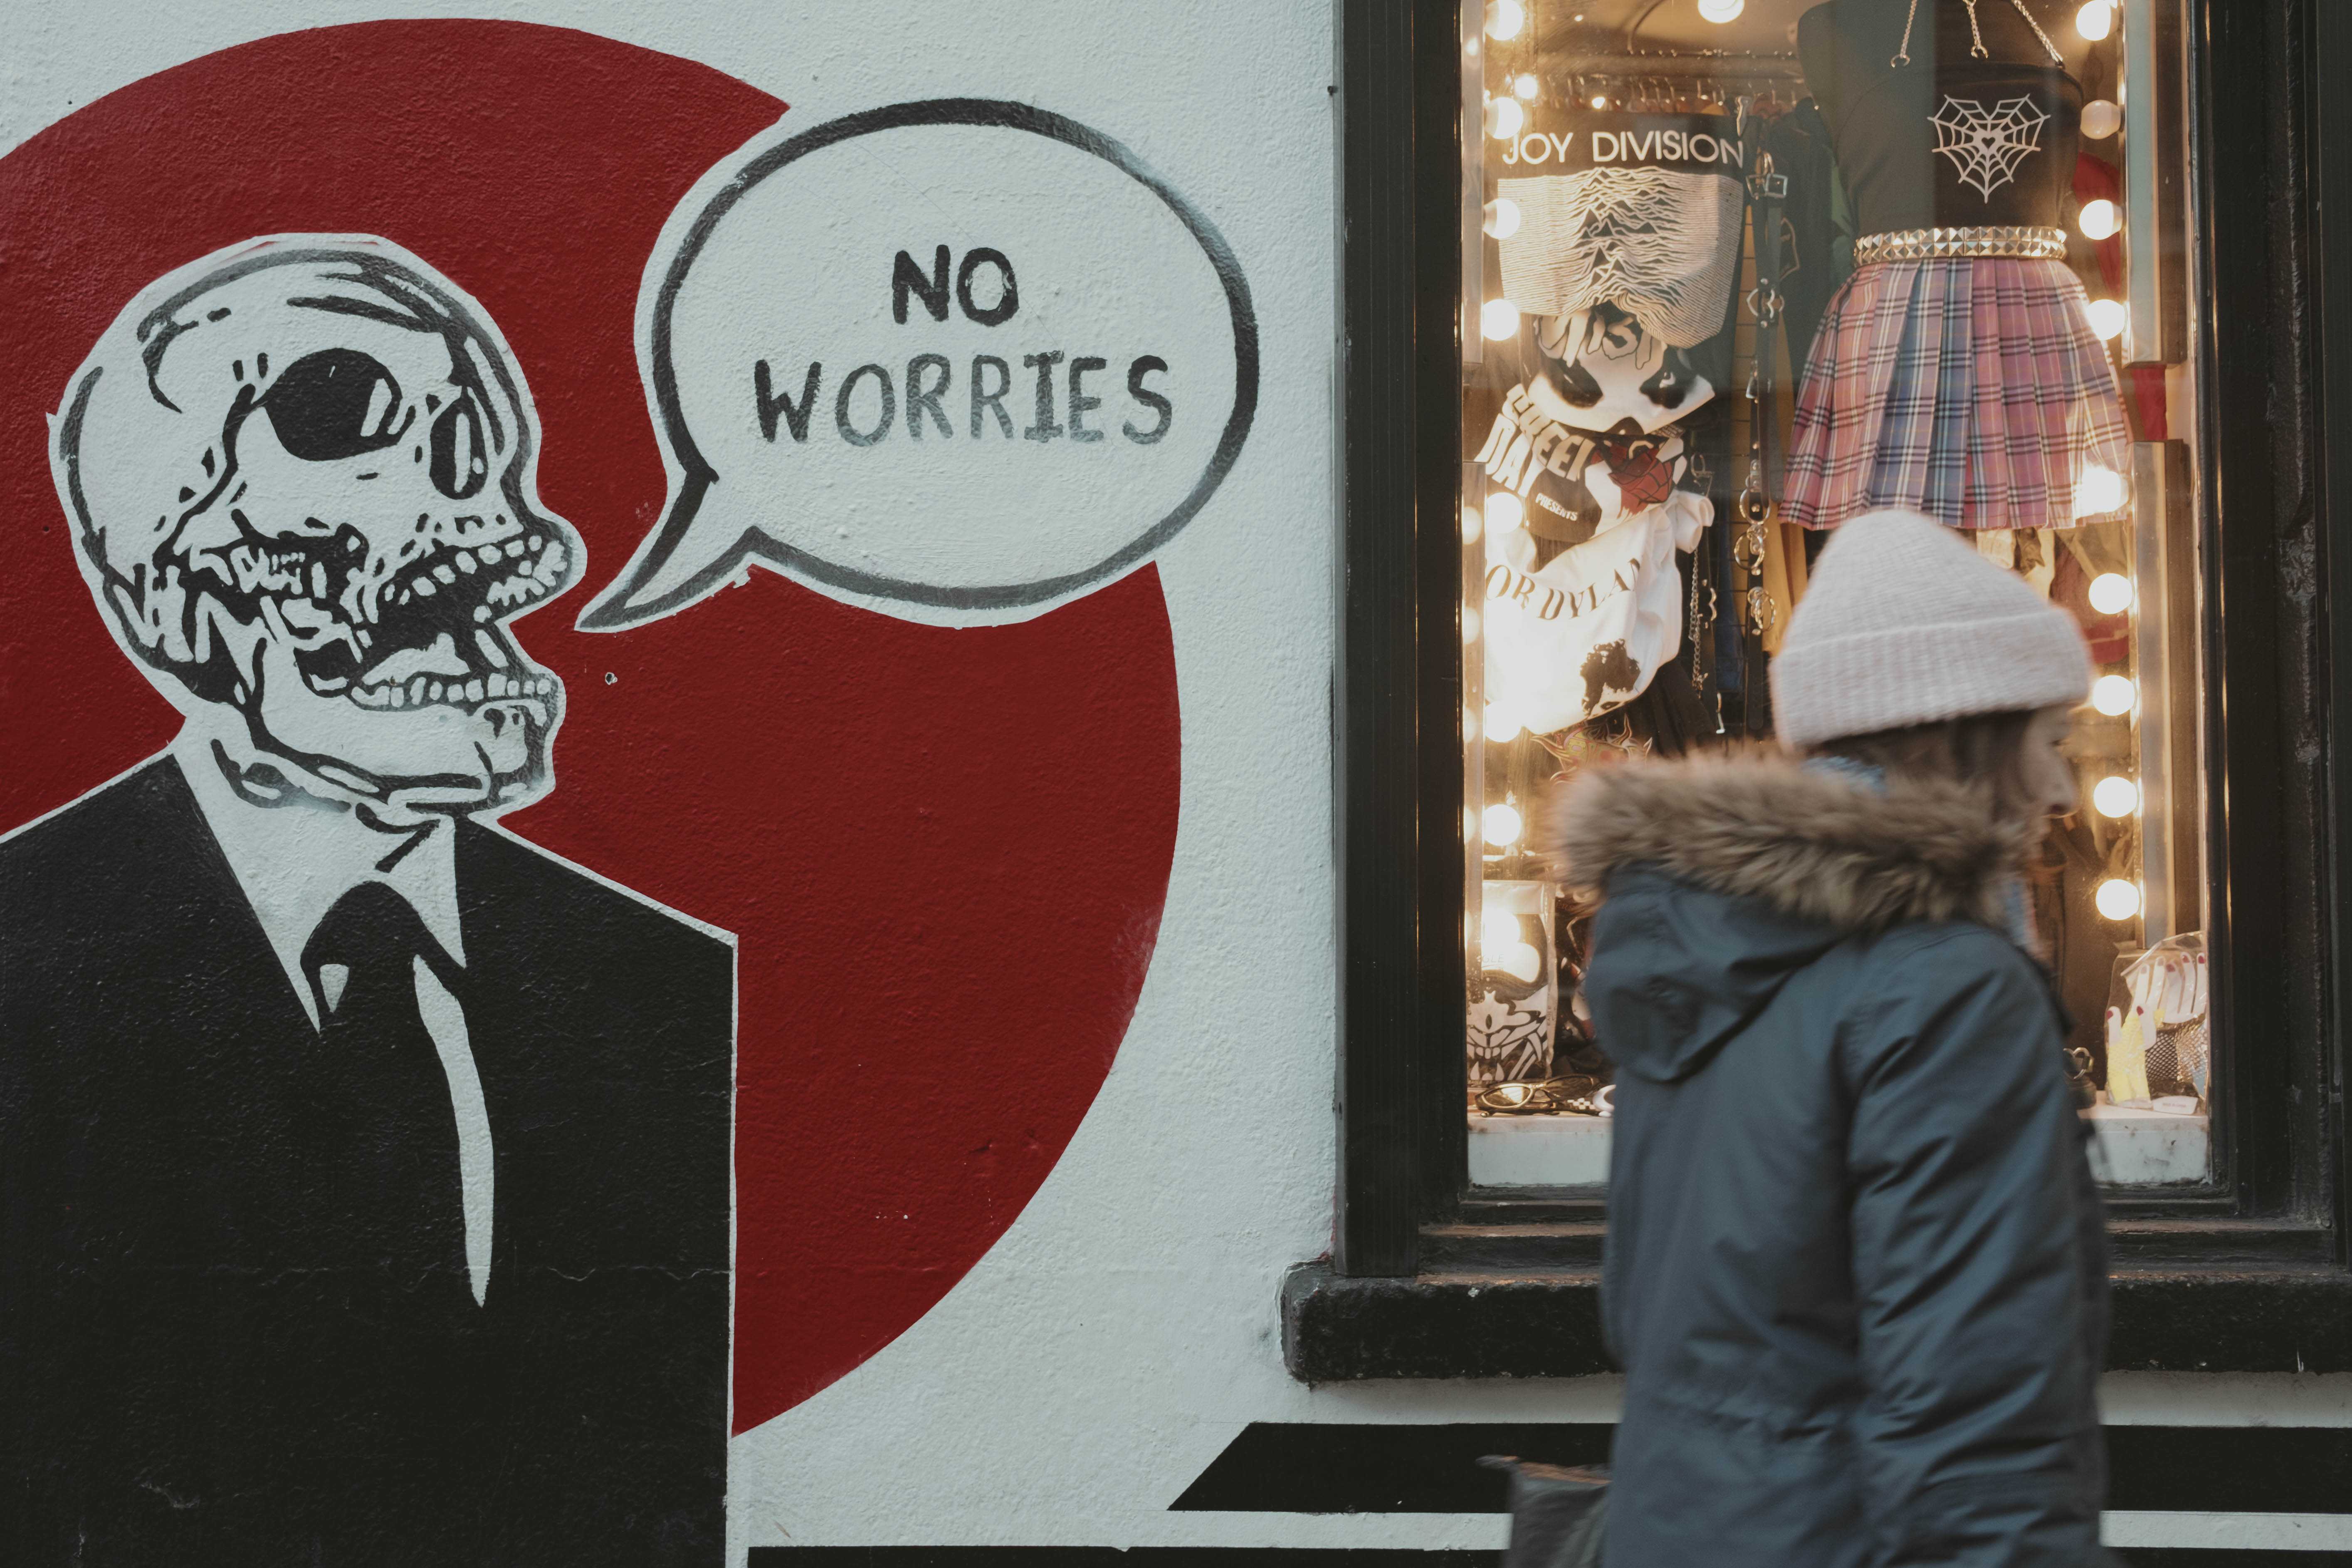 Street art with a skeleton in a suit saying 'No worries!' while a woman hurries by.